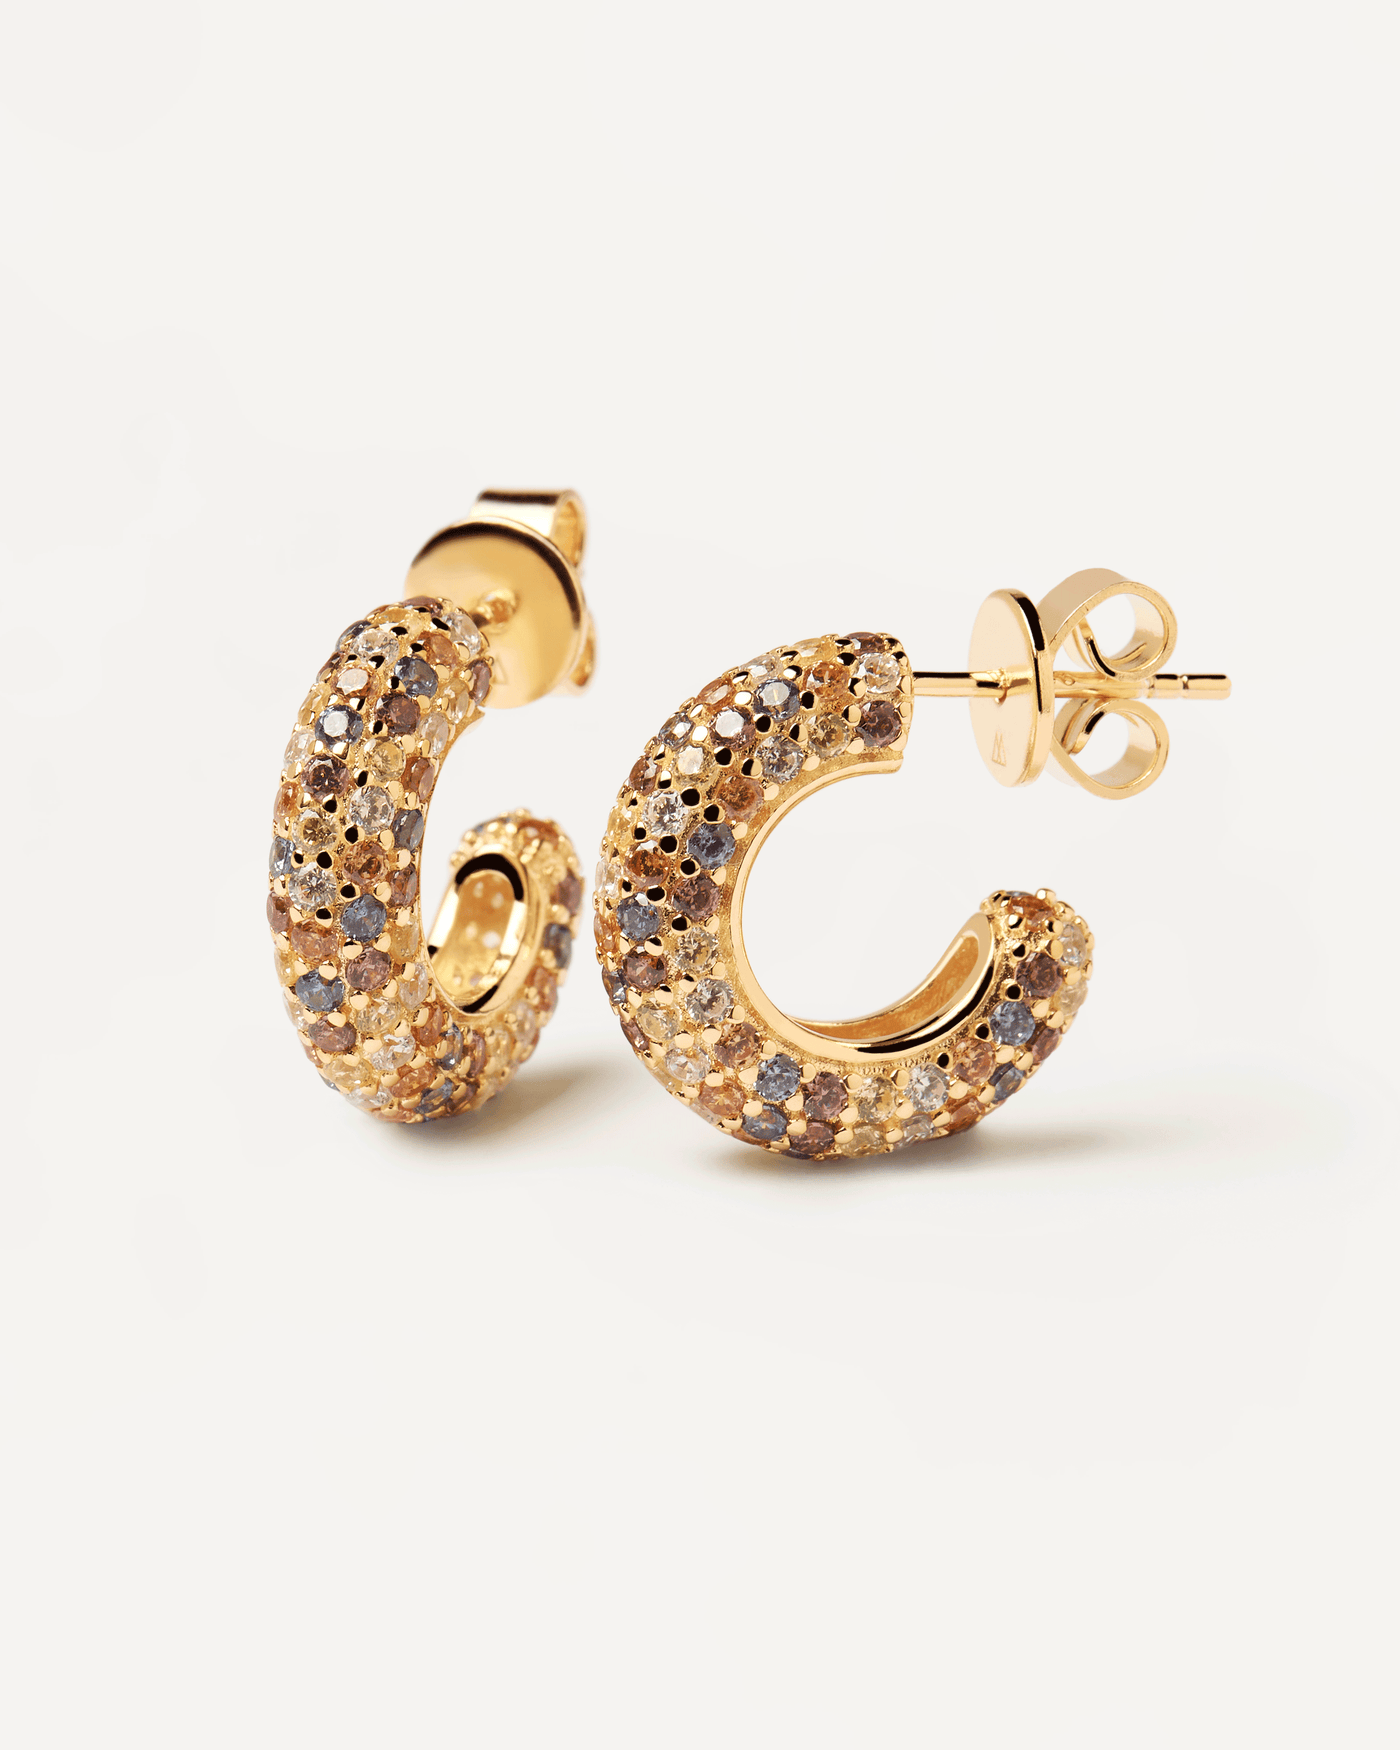 2023 Selection | Tiger Earrings. Gold-plated silver hoops with five color zirconias. Get the latest arrival from PDPAOLA. Place your order safely and get this Best Seller. Free Shipping.